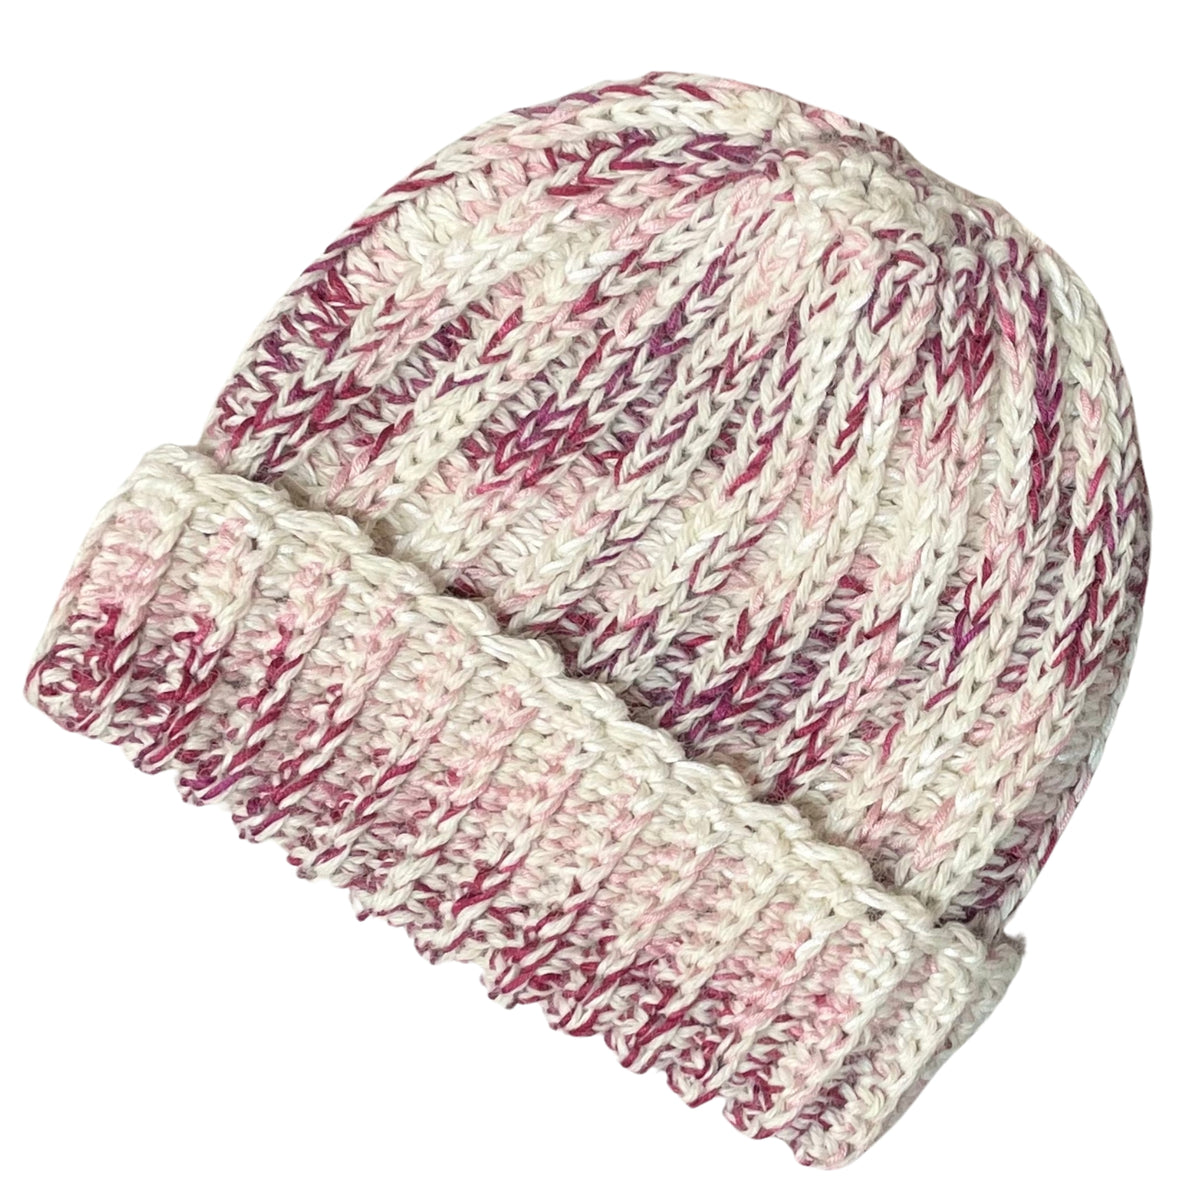 Fuchsia, dark pink, light pink, carnation, and white colored cozy soft warm handmade knitted crochet ridge ribbed hat made in Montana by Alpacas of Montana.